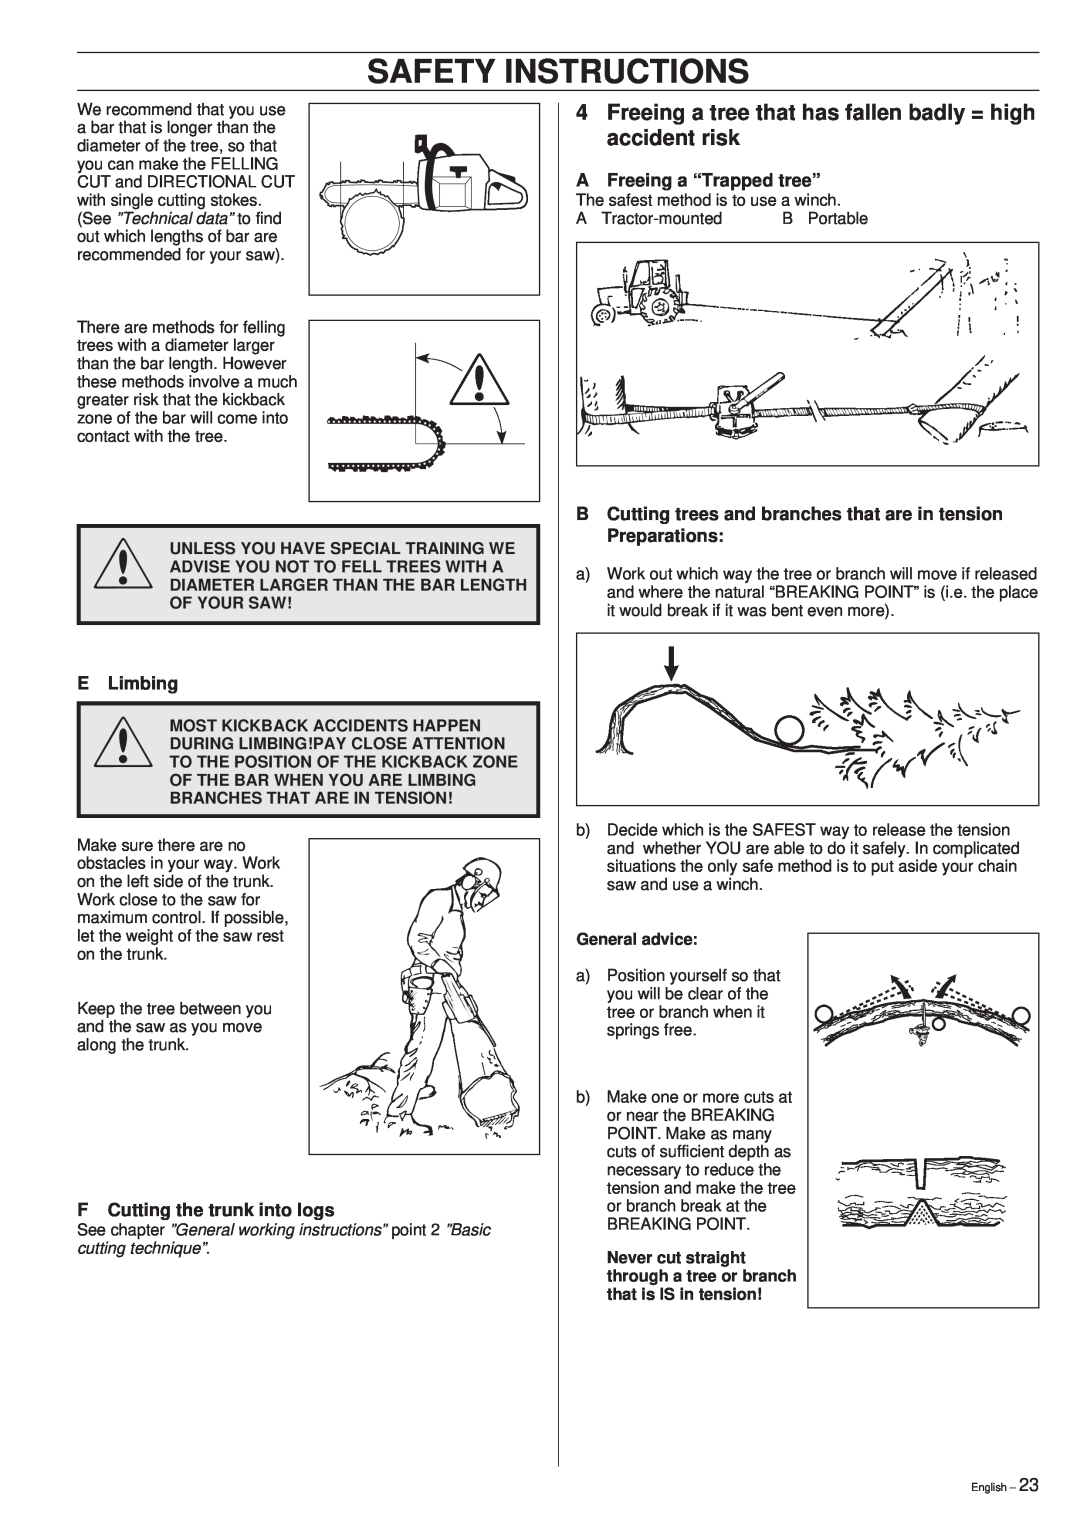 Husqvarna 288XP/XP lite manual Safety Instructions, Freeing a tree that has fallen badly = high accident risk, E Limbing 